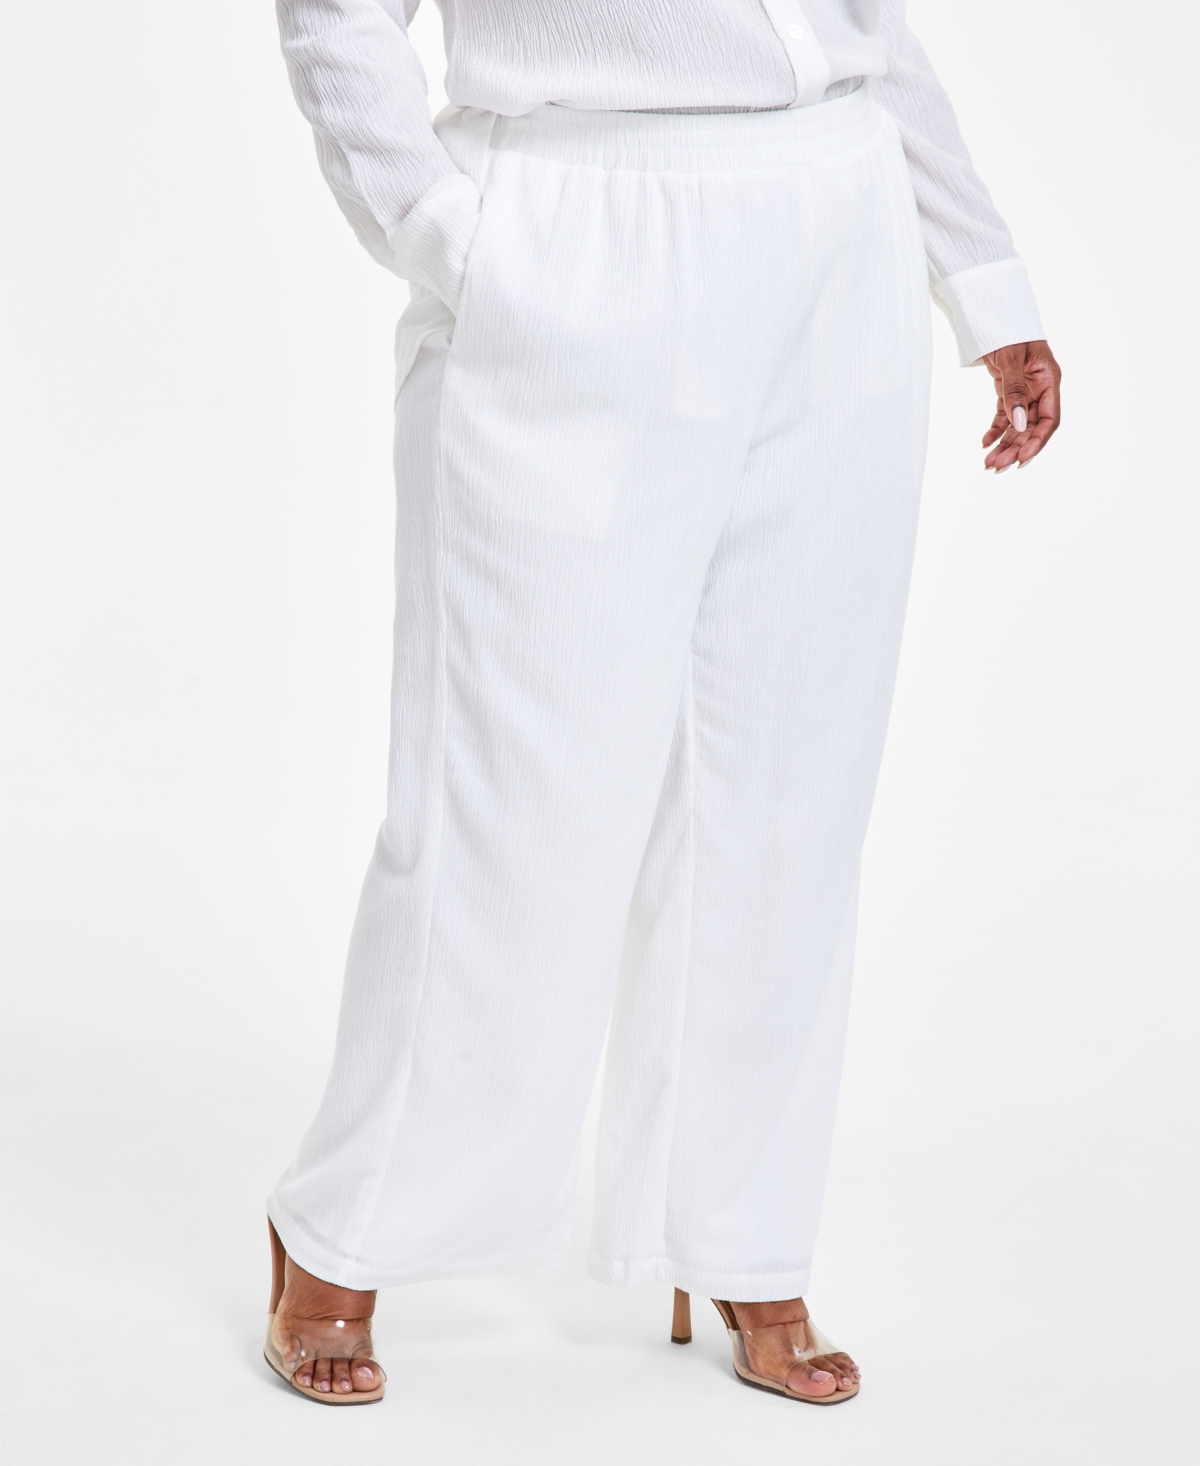 Nina Parker Trendy Plus Size Textured Pull-on Pants In Ivory